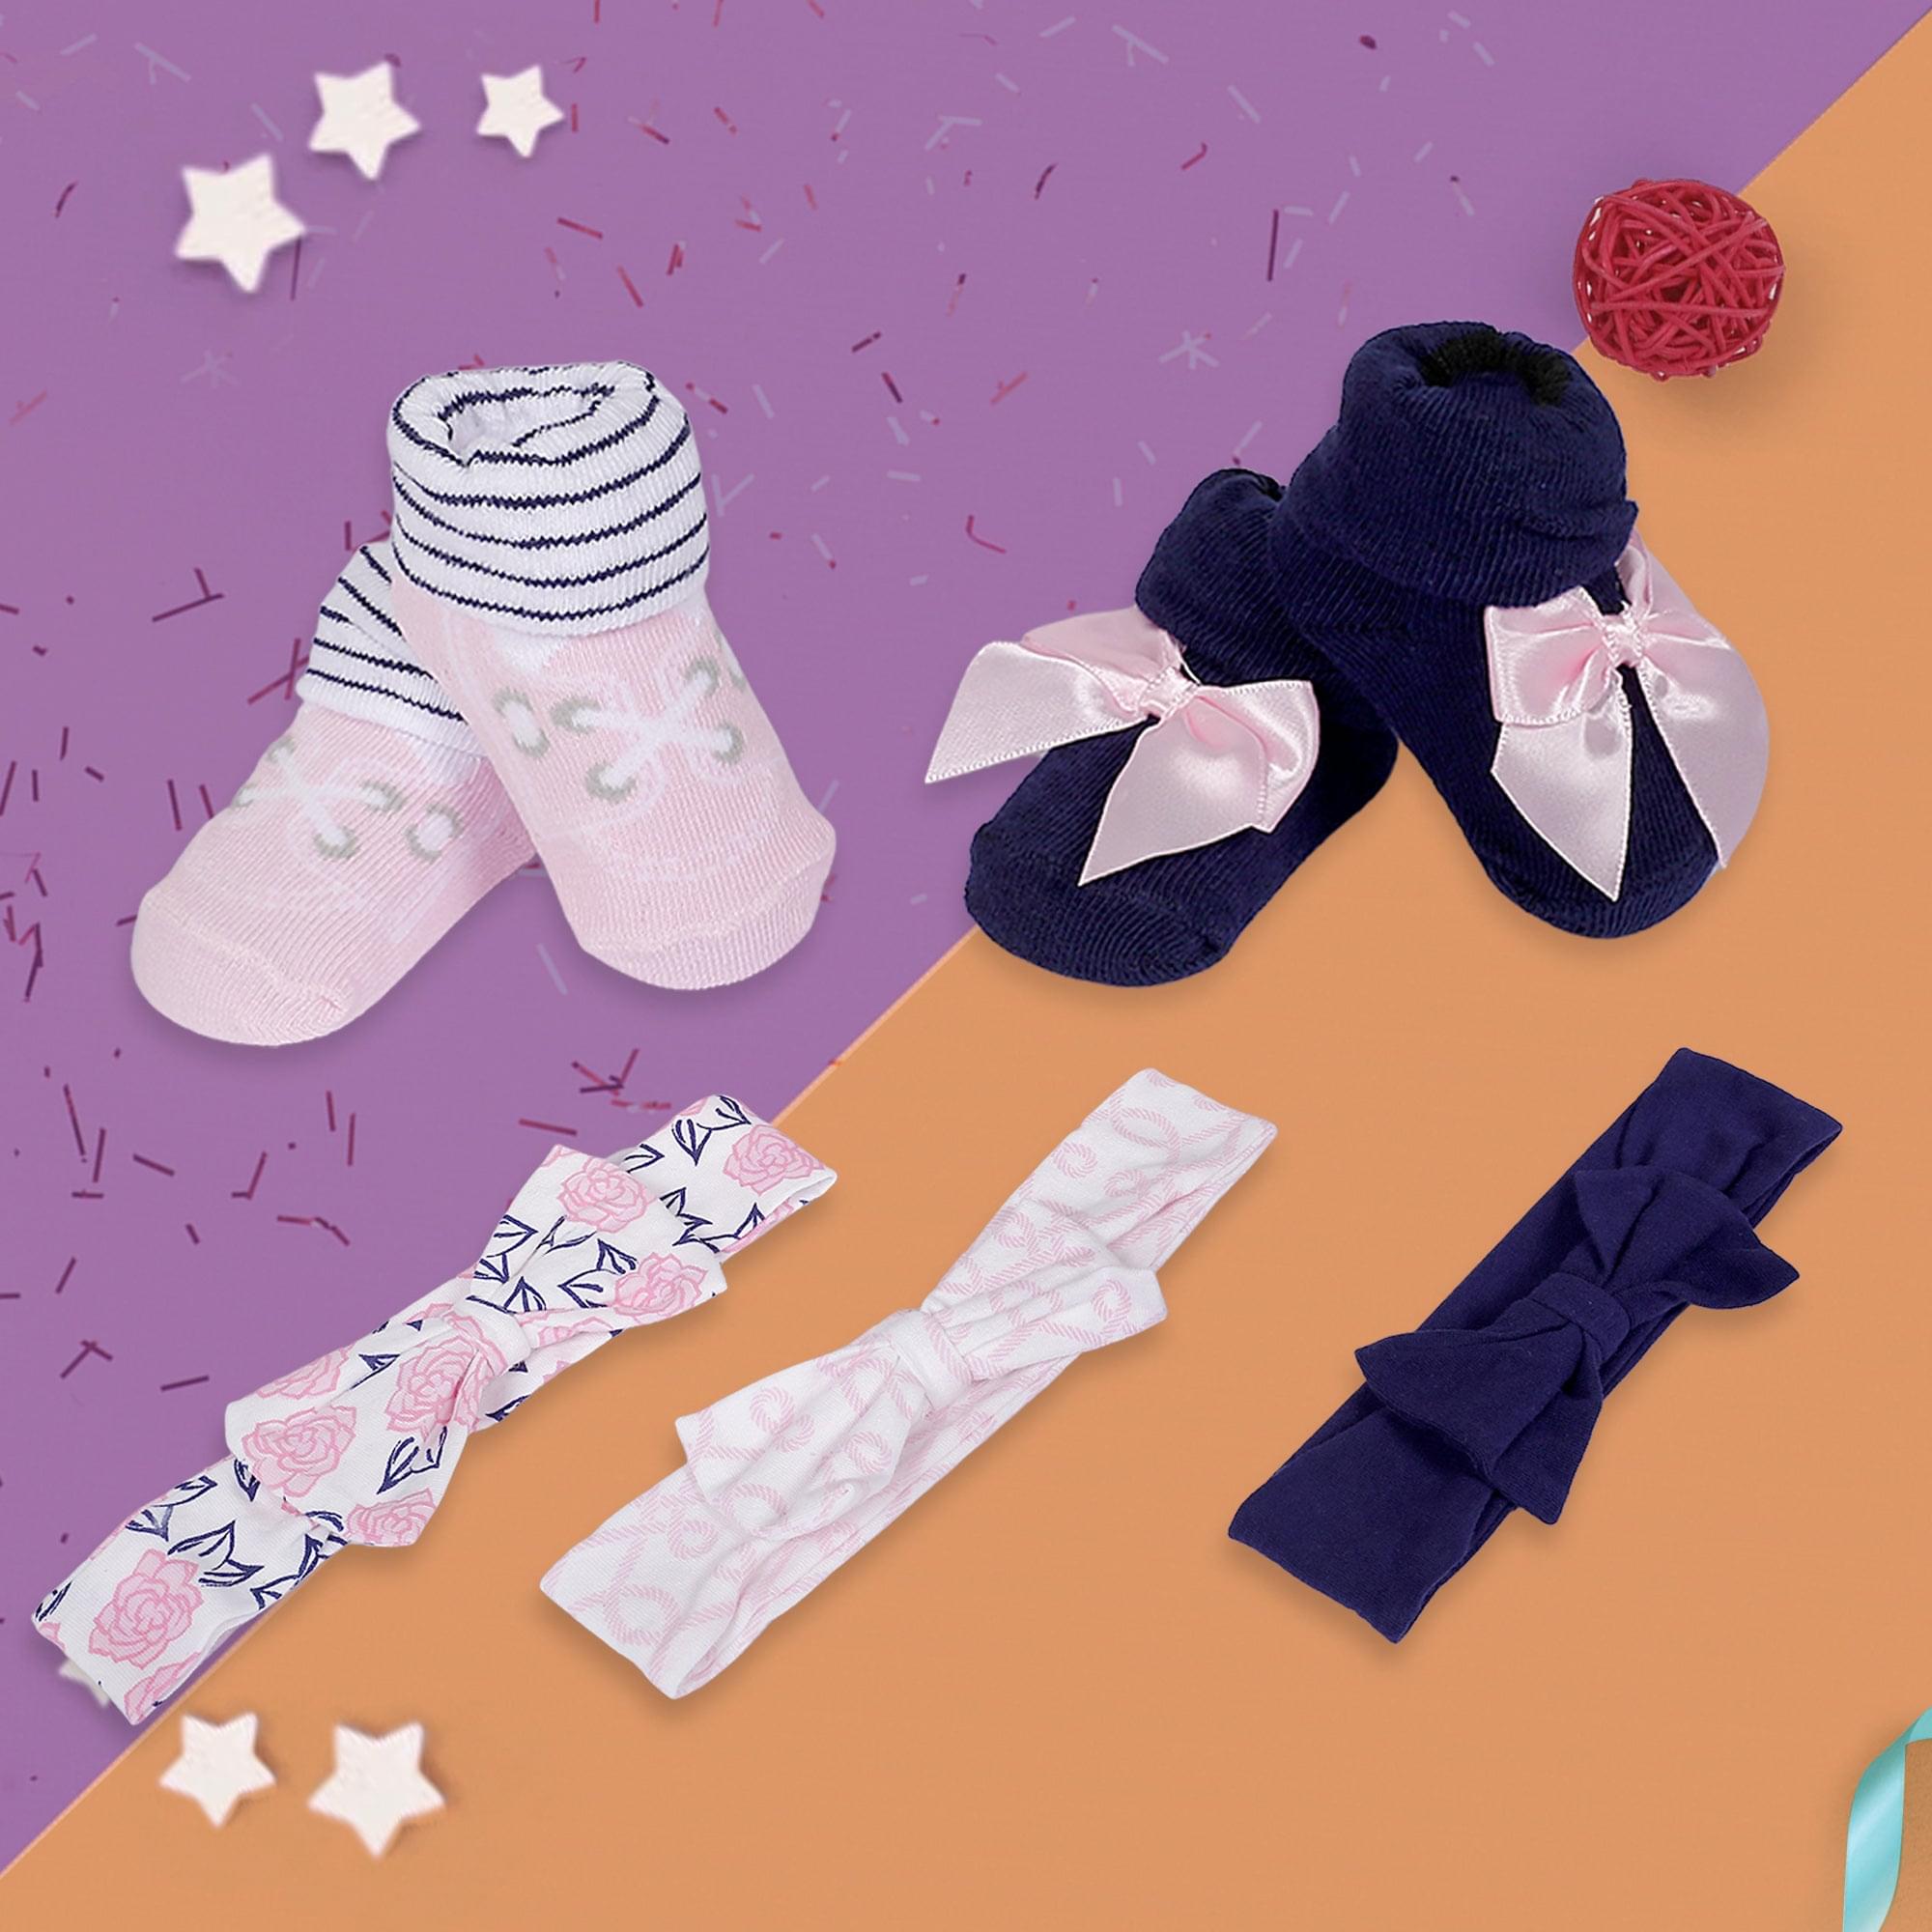 3 Headbands And 2 Pair Socks Gift Set Floral Pink And Blue - Baby Moo